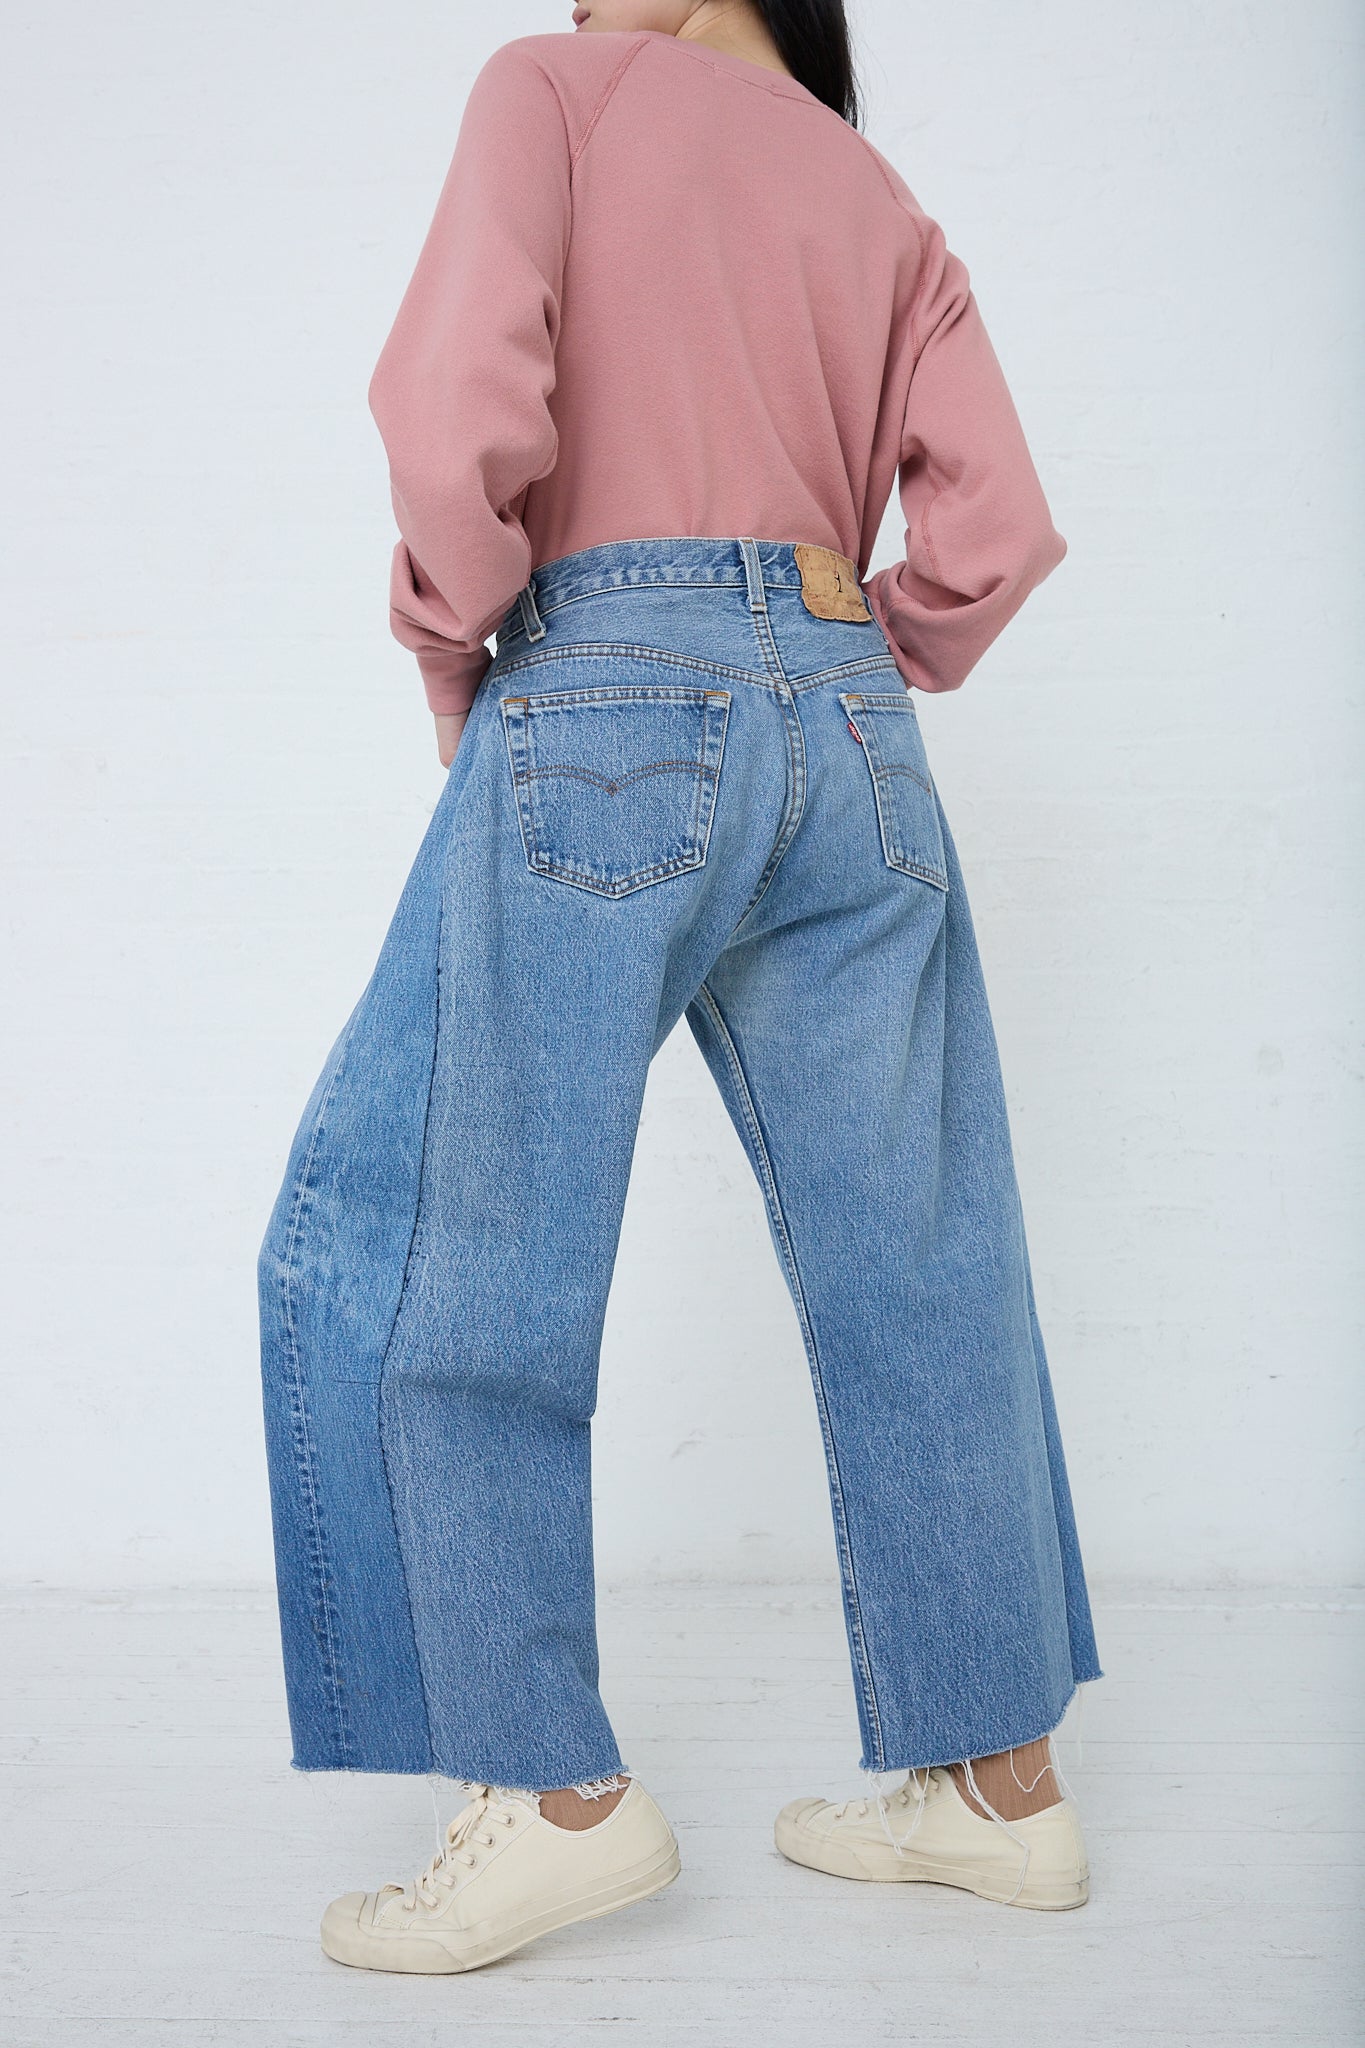 Person in a pink long-sleeve shirt and wide-leg B Sides Vintage Lasso in Indigo jeans, viewed from the back, standing against a plain white background.